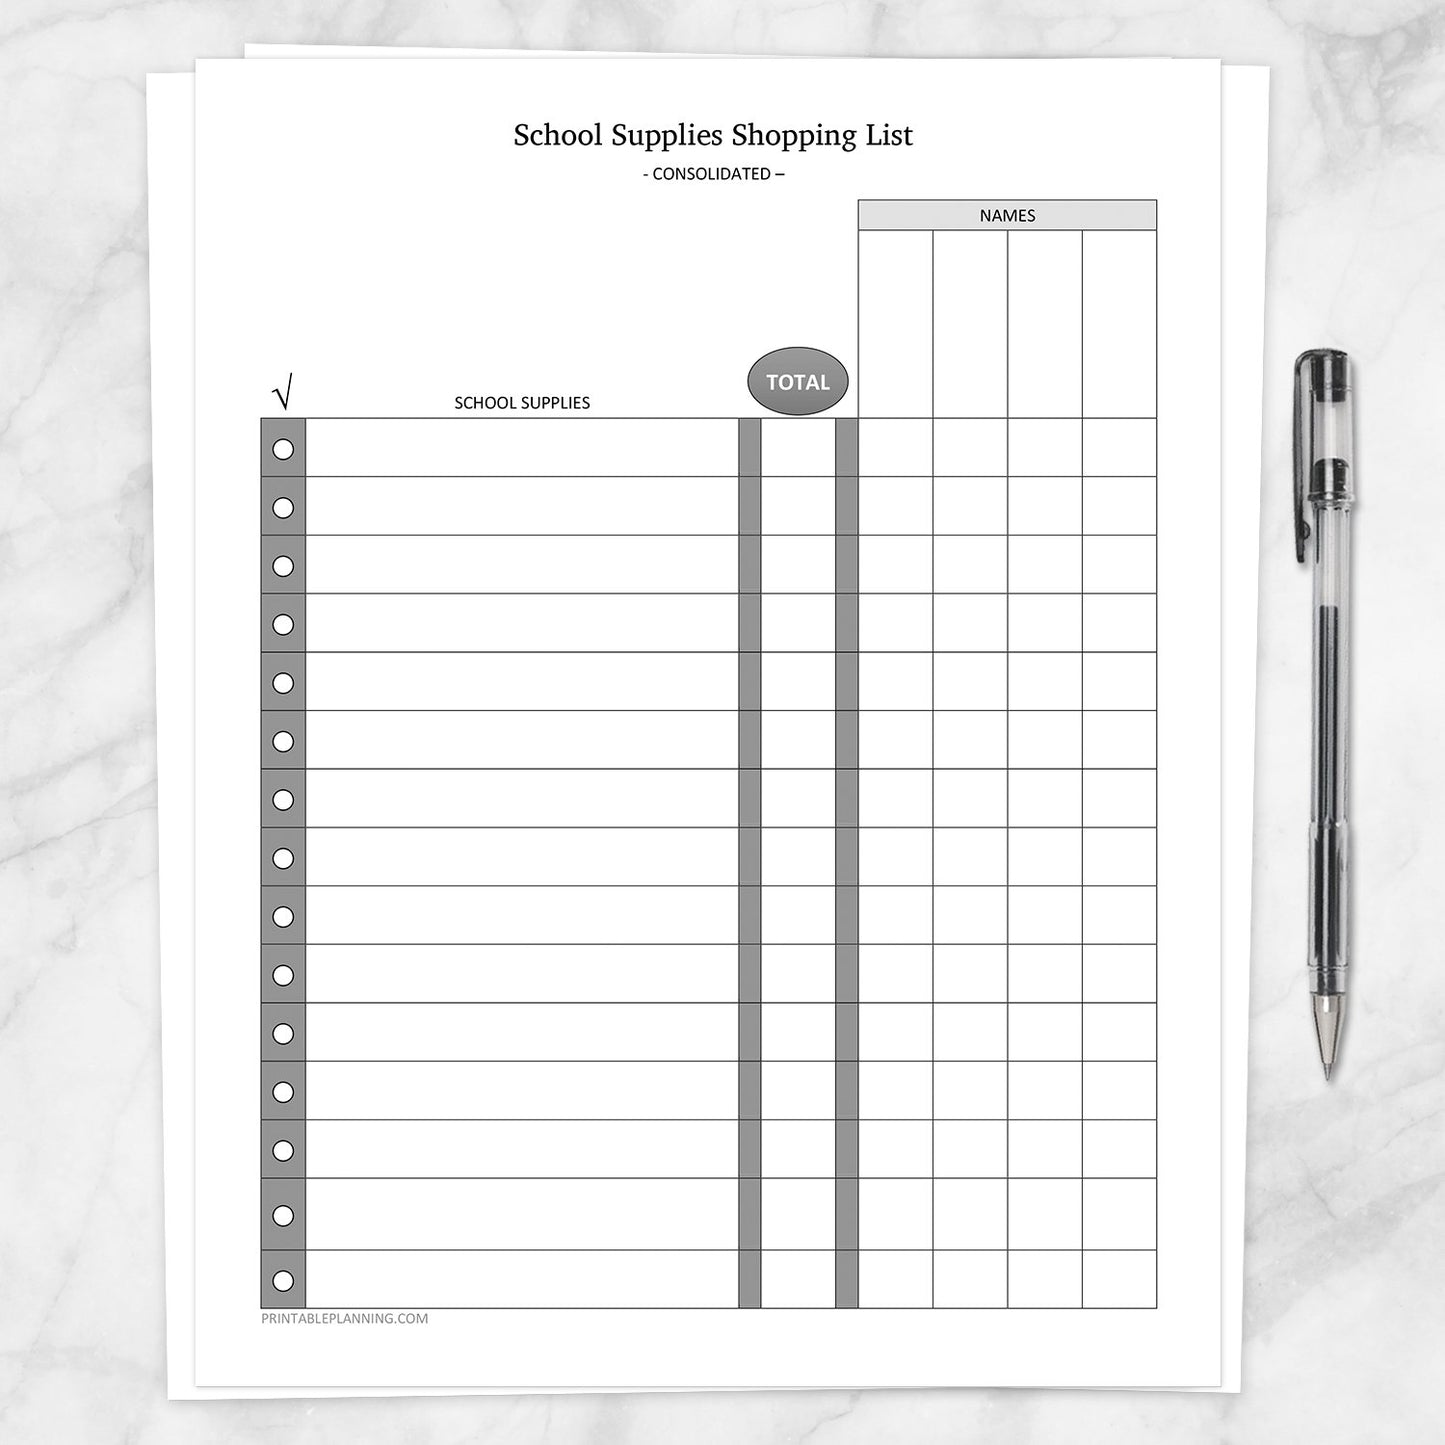 Printable School Supplies Shopping List, Consolidated, at Printable Planning